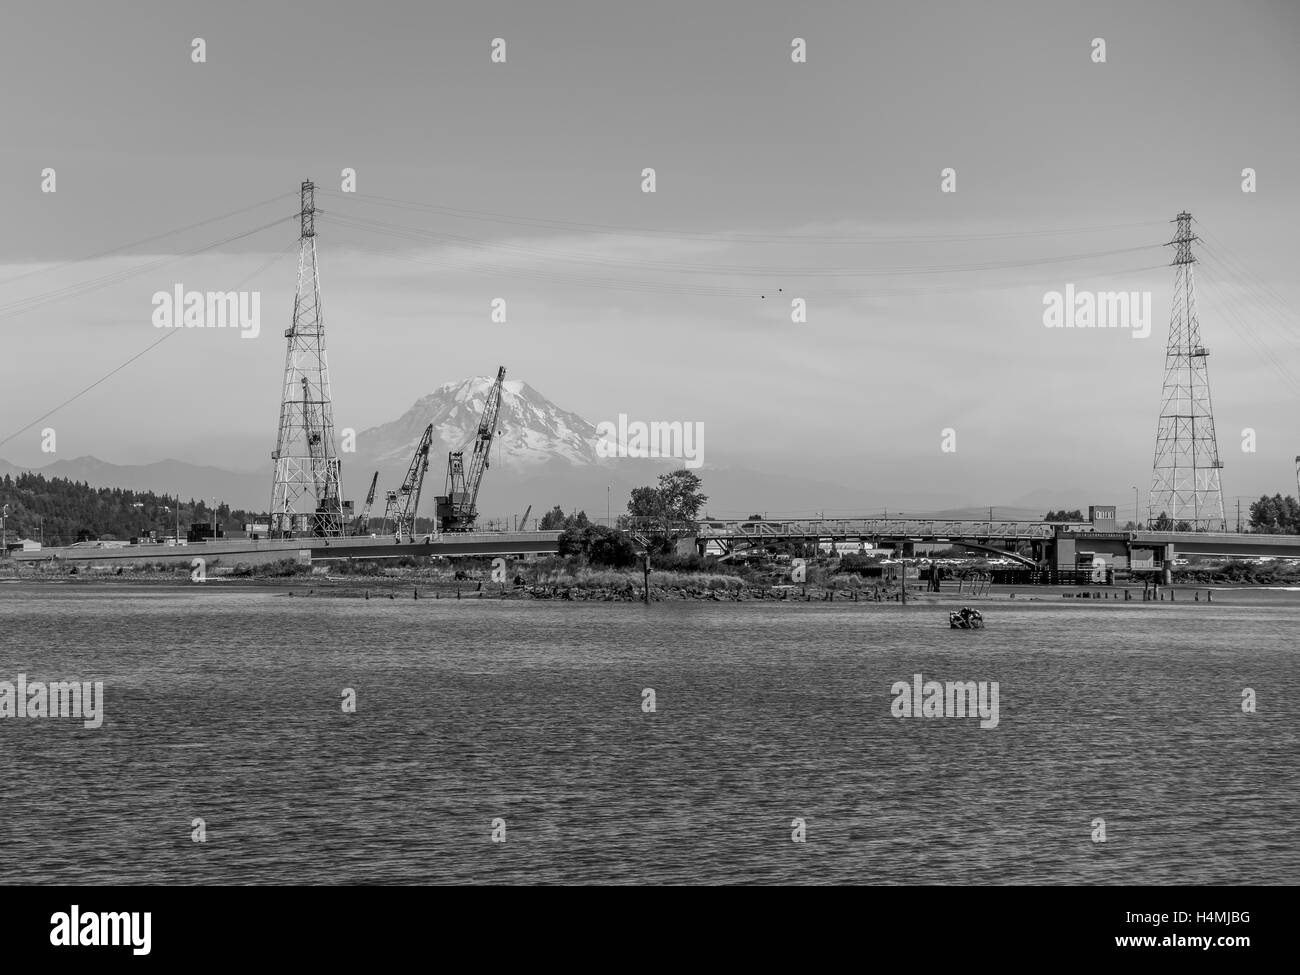 Majestic Mount Rainier is in the distance behind power lines and equipment. Black and white image. Stock Photo